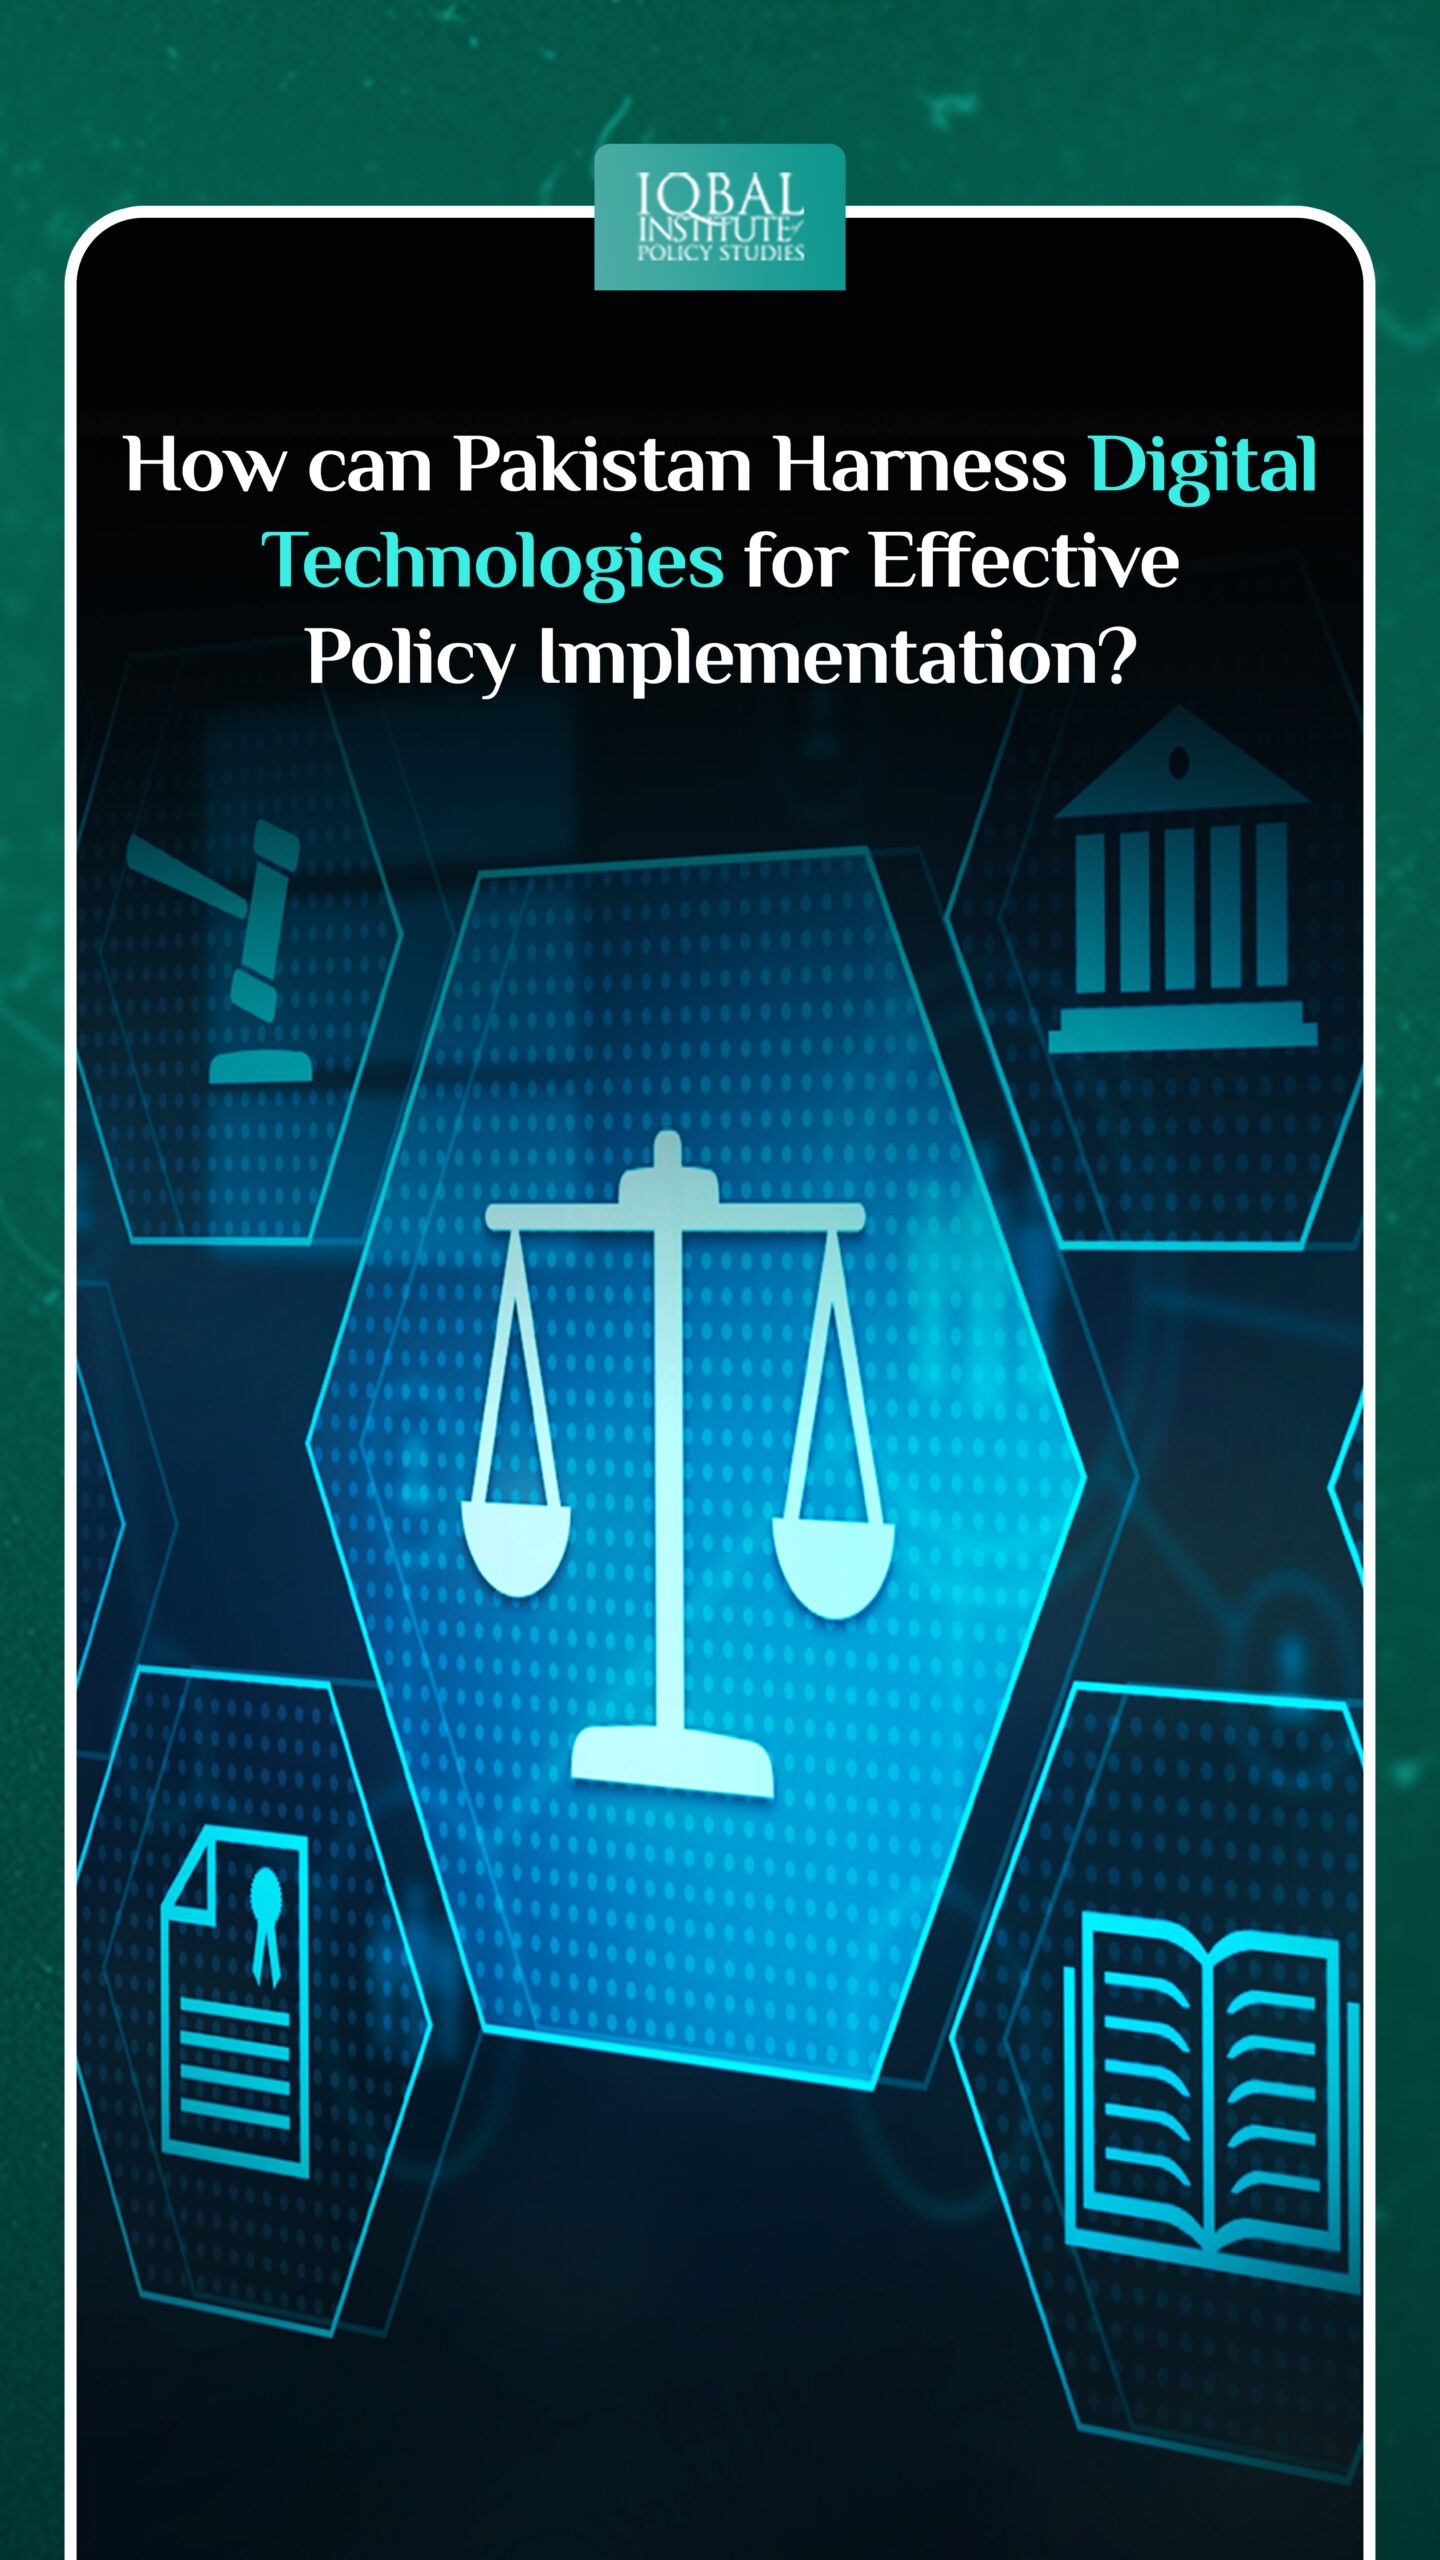 How can Pakistan Harness Digital Technologies for Effective Policy Implementation